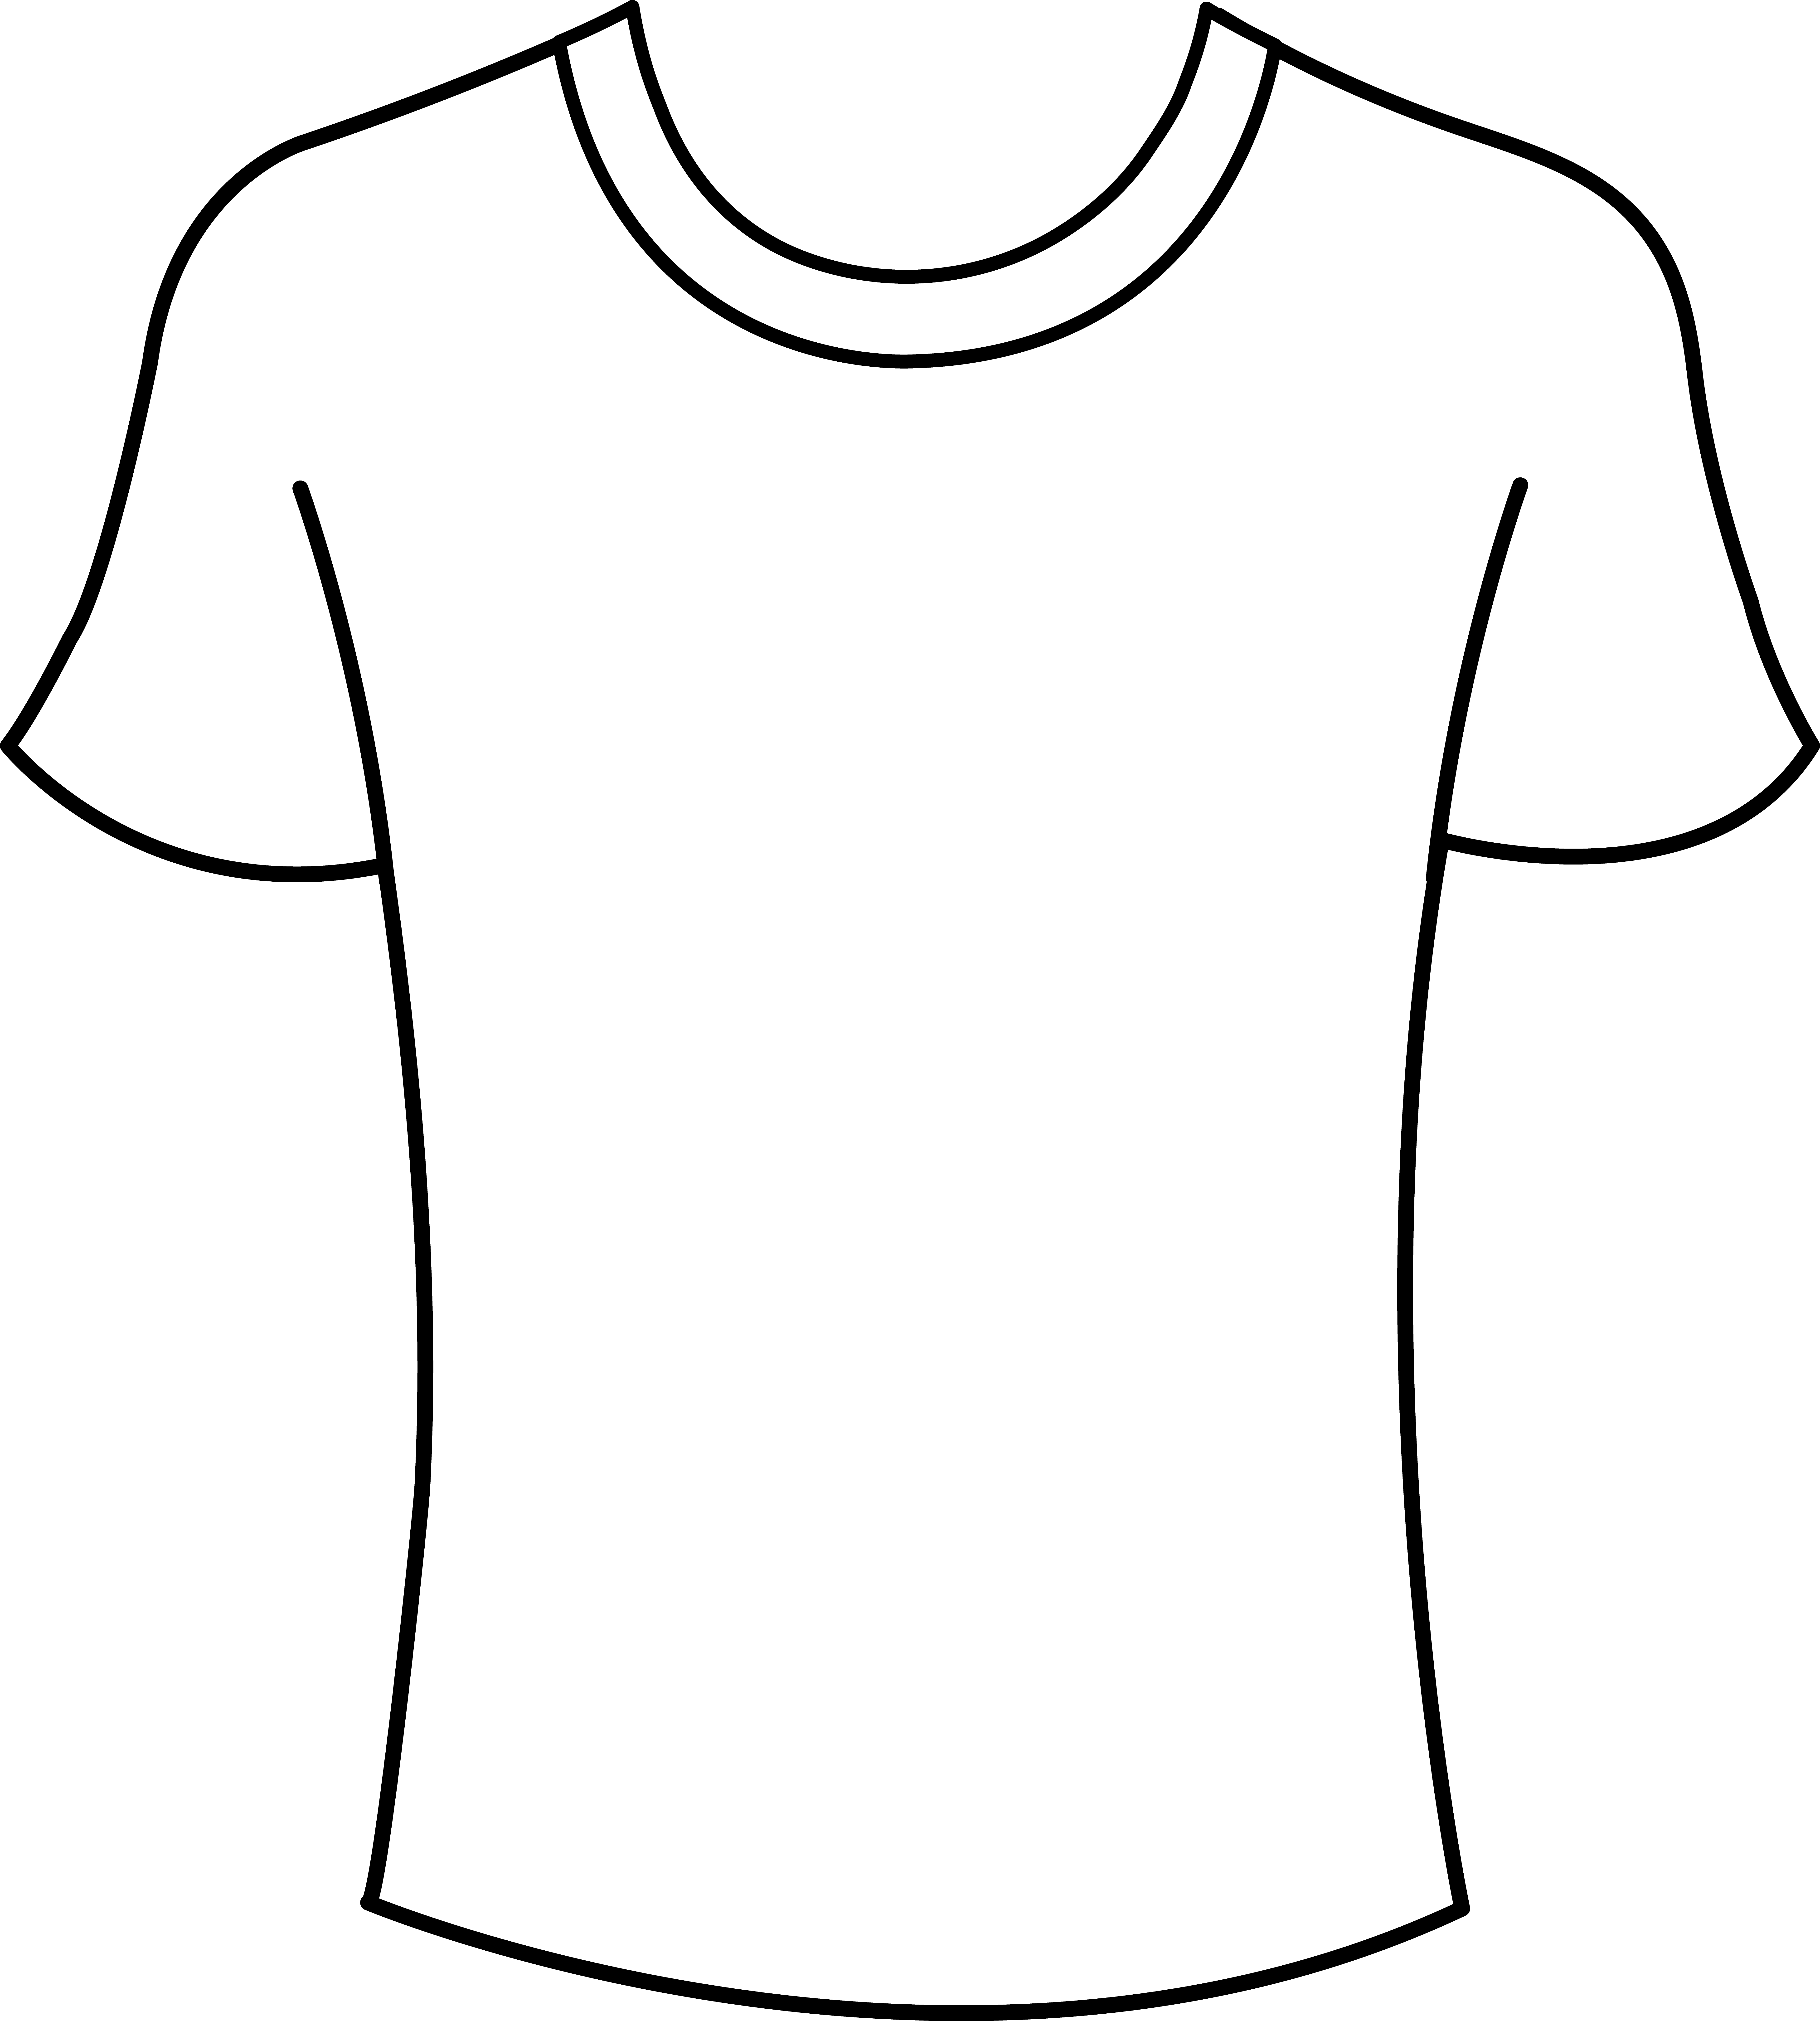 Shirt clipart colored shirt. Mens t template free